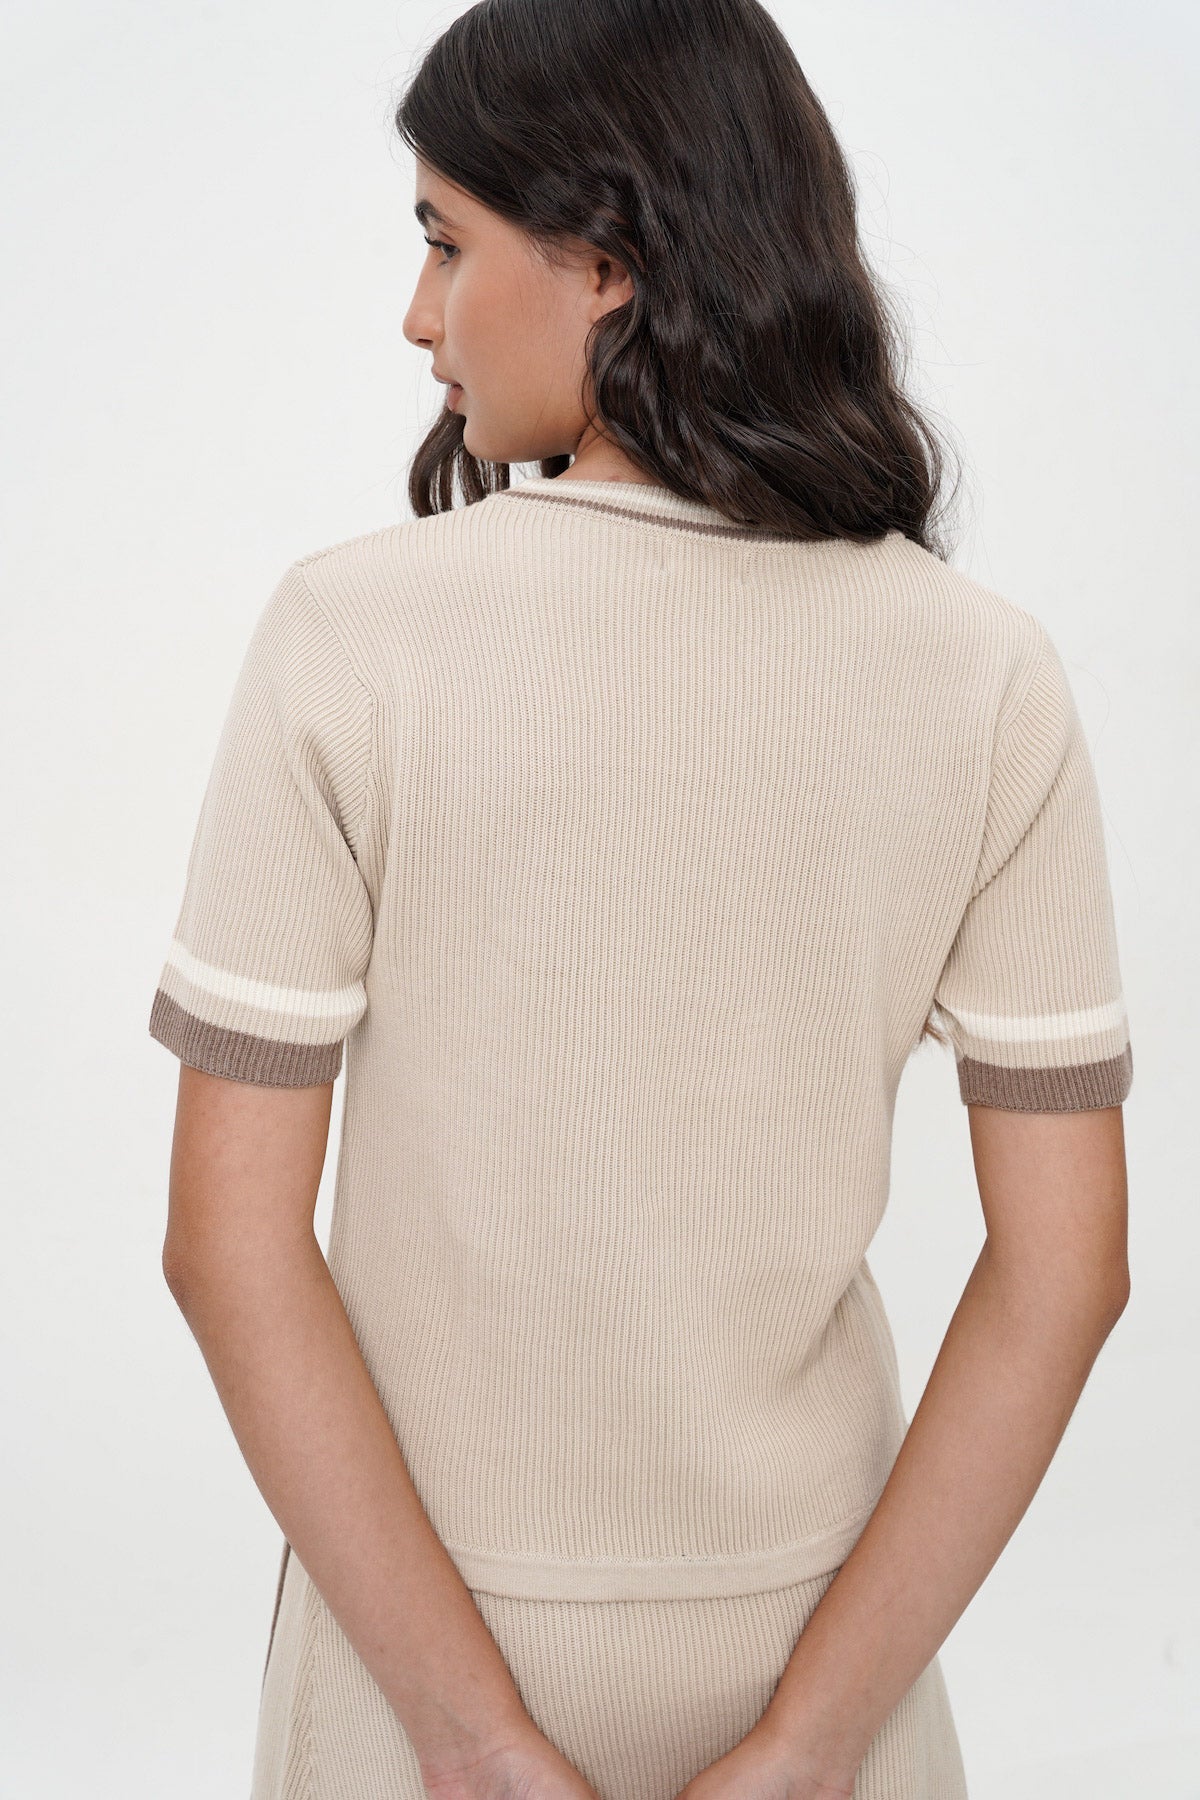 Kyle Knit Top in Cream